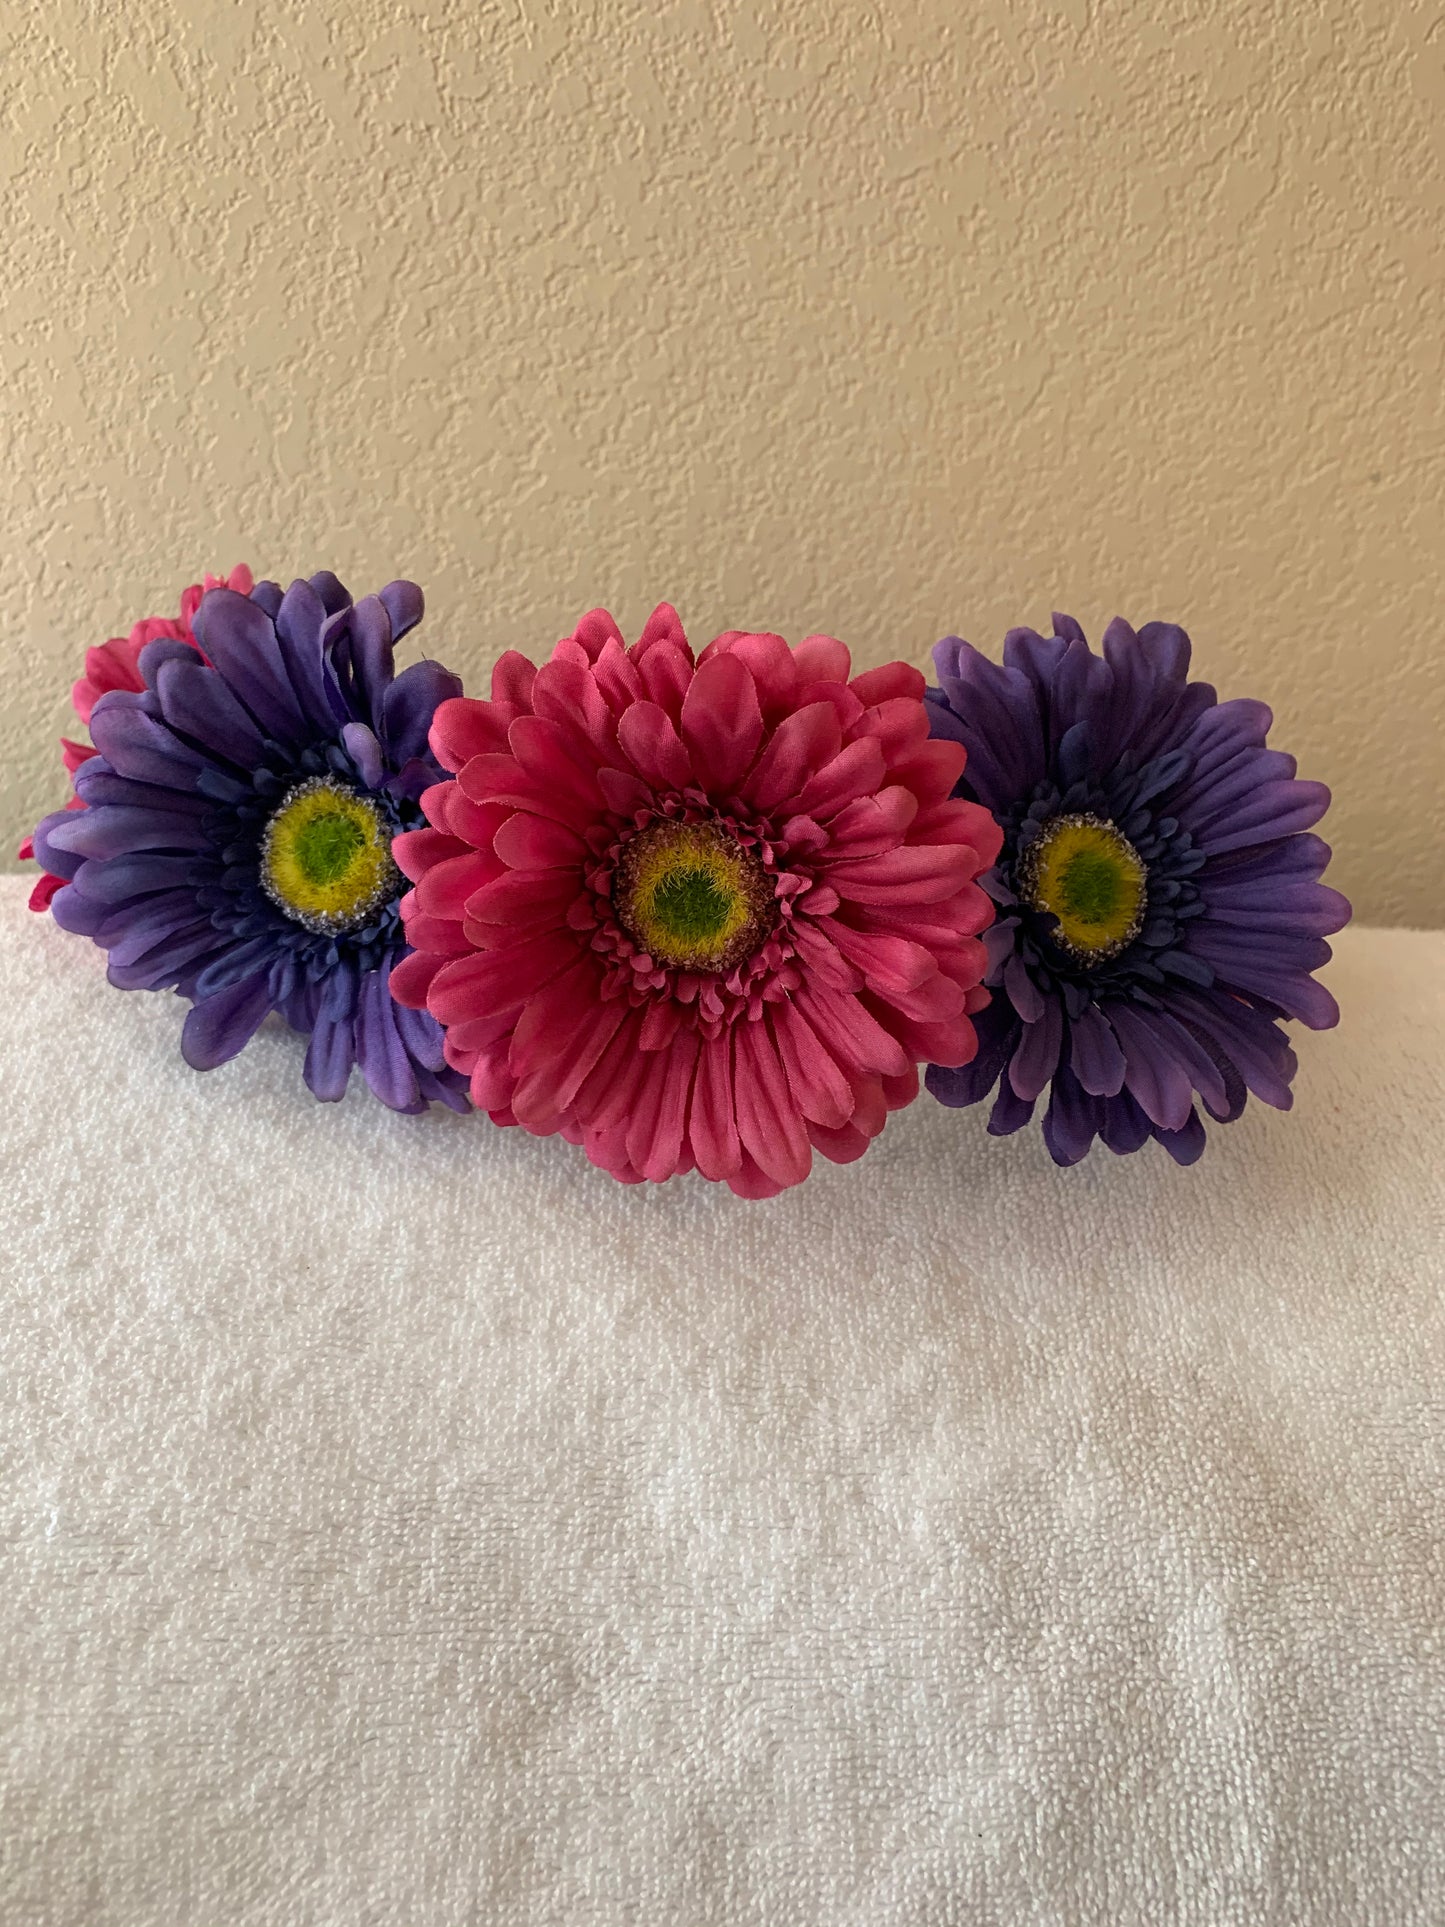 Large Wreath Lighted - Pink and Purple Daisies